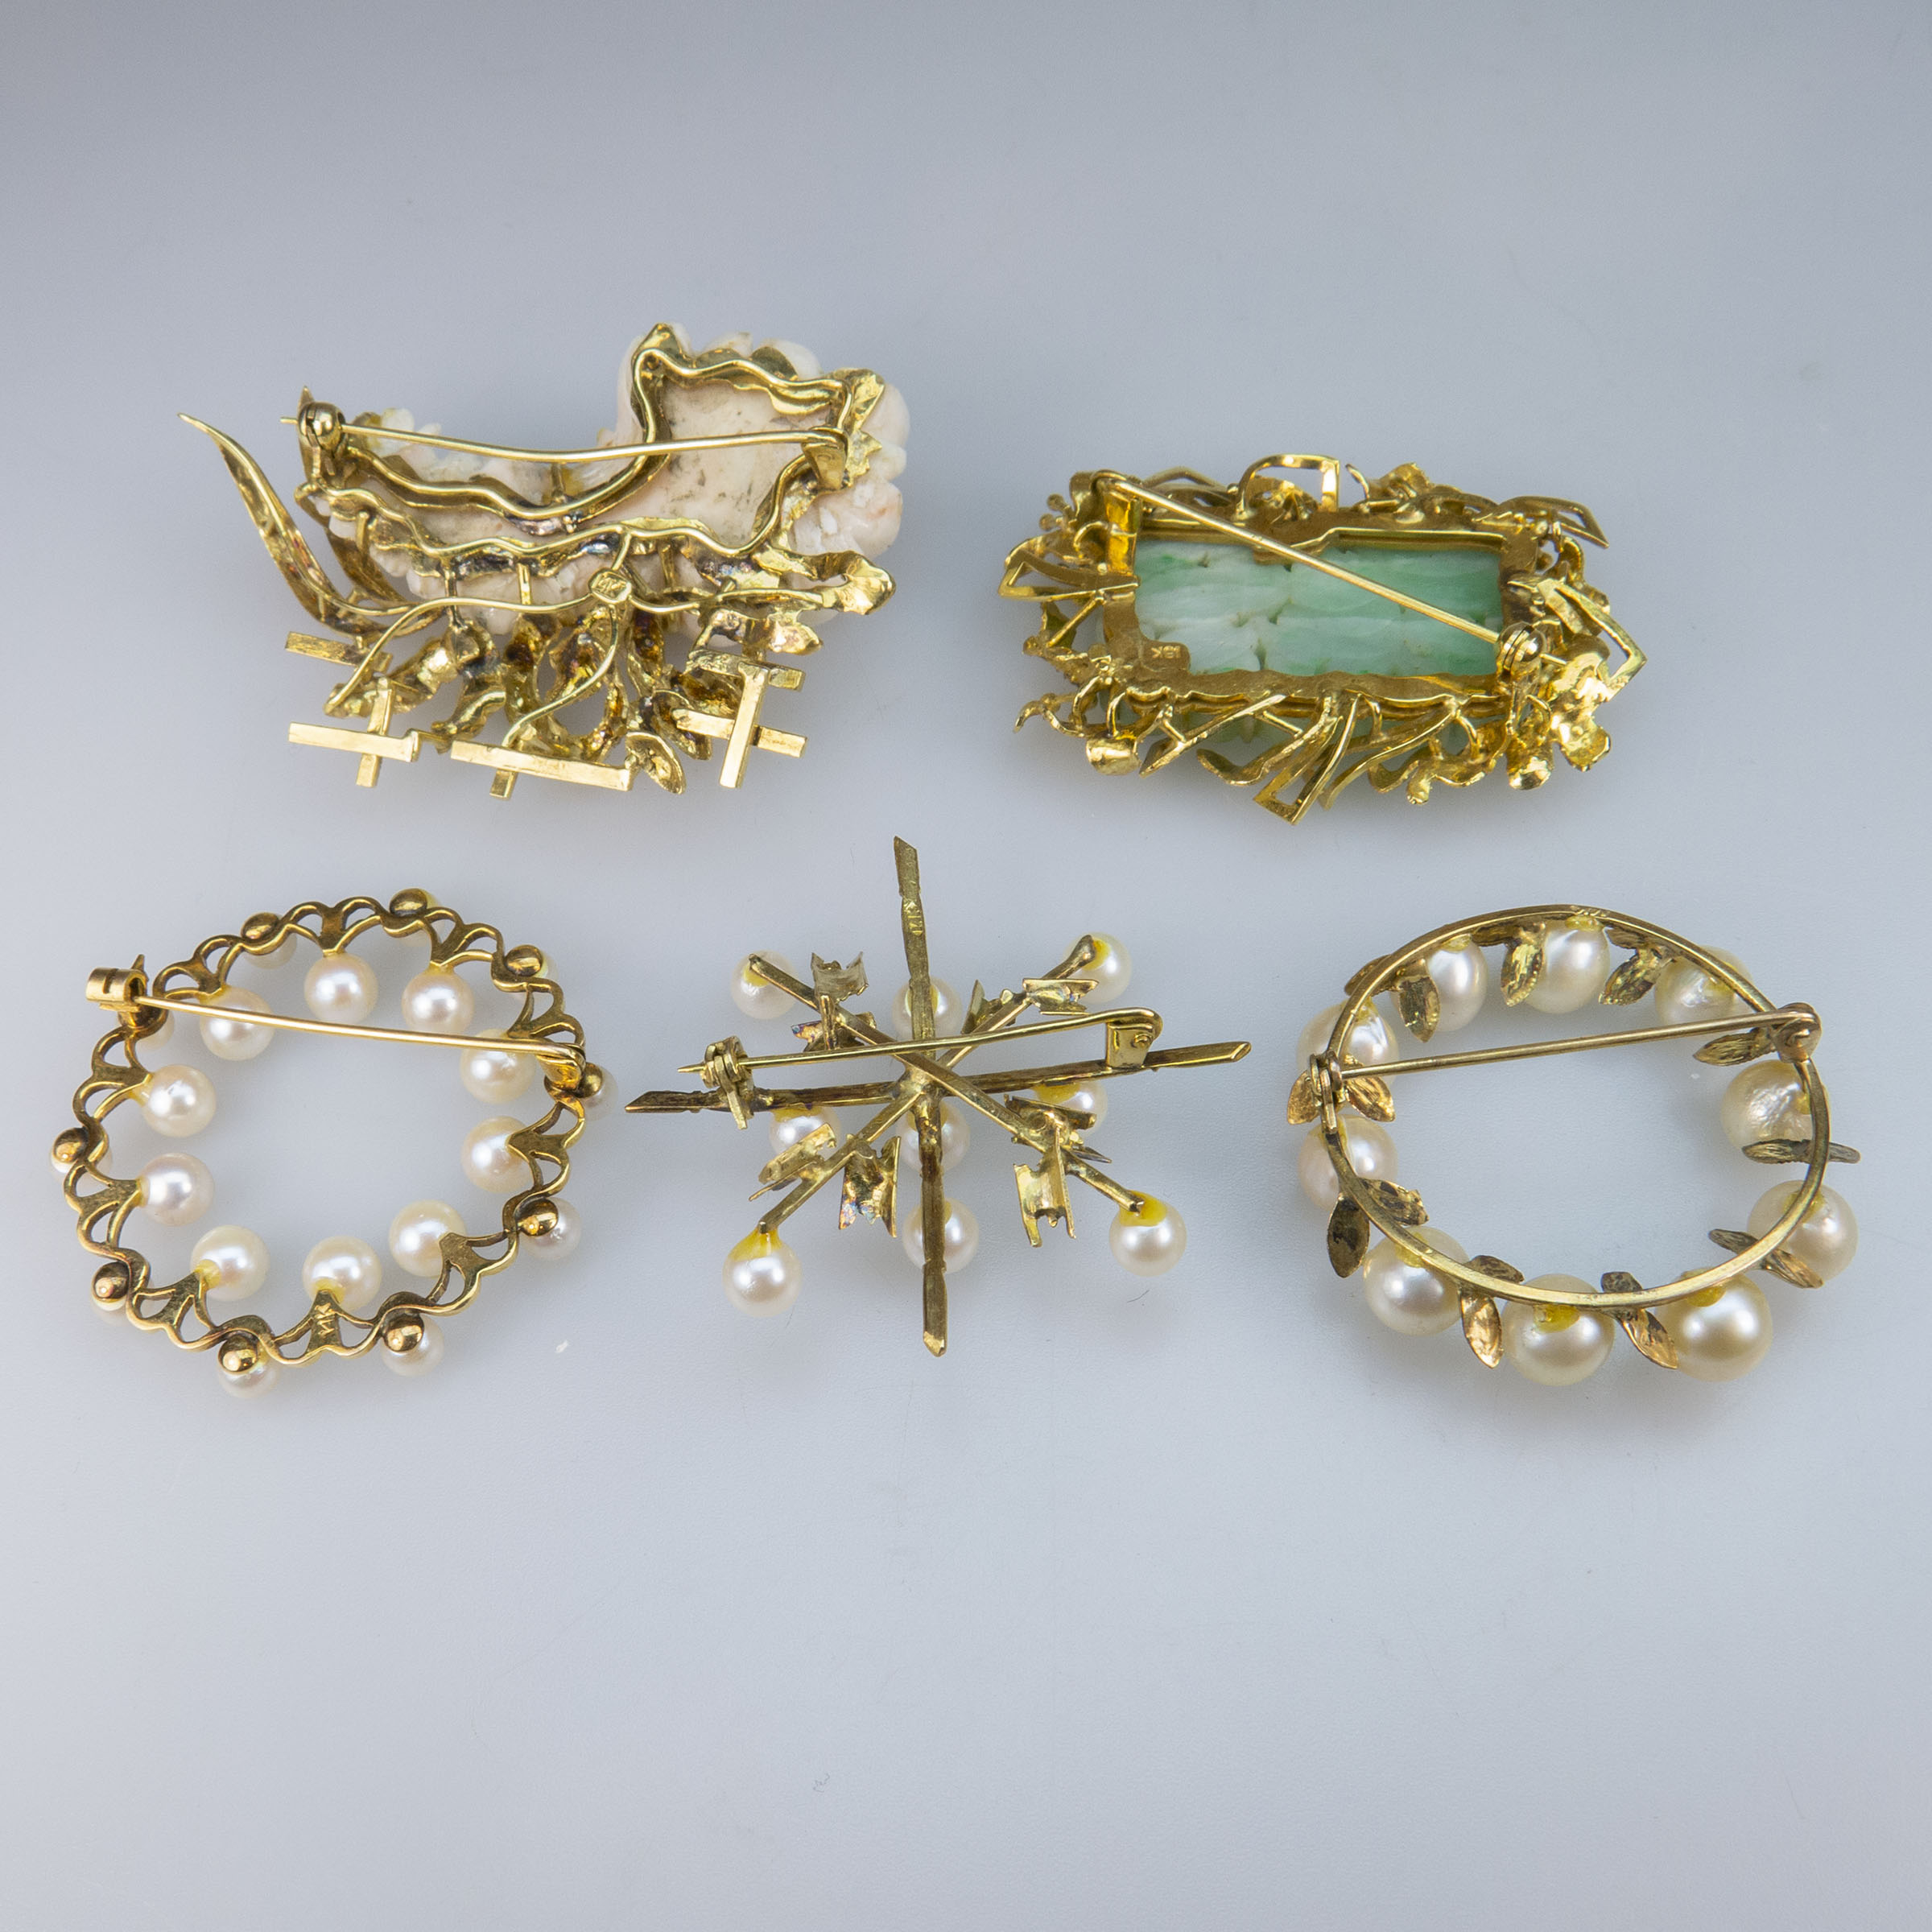 Five Gold Brooches